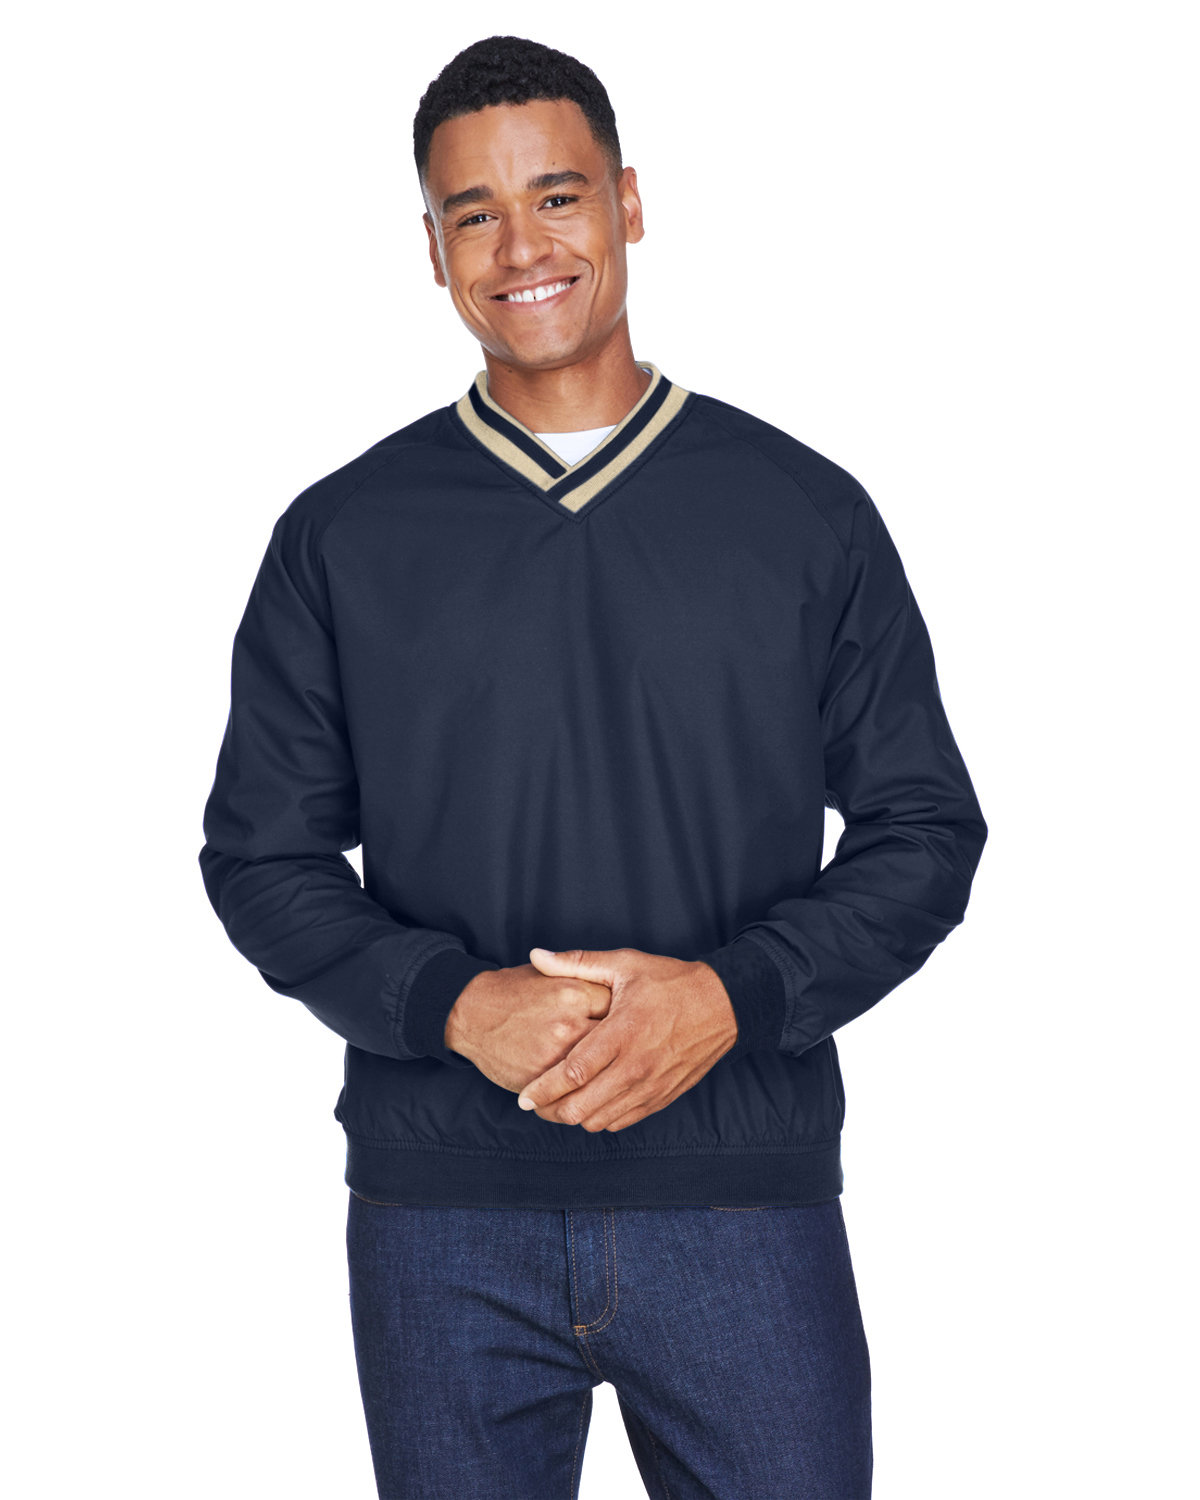 North End 88132 Adult V-Neck Unlined Wind Shirt - From $10.49